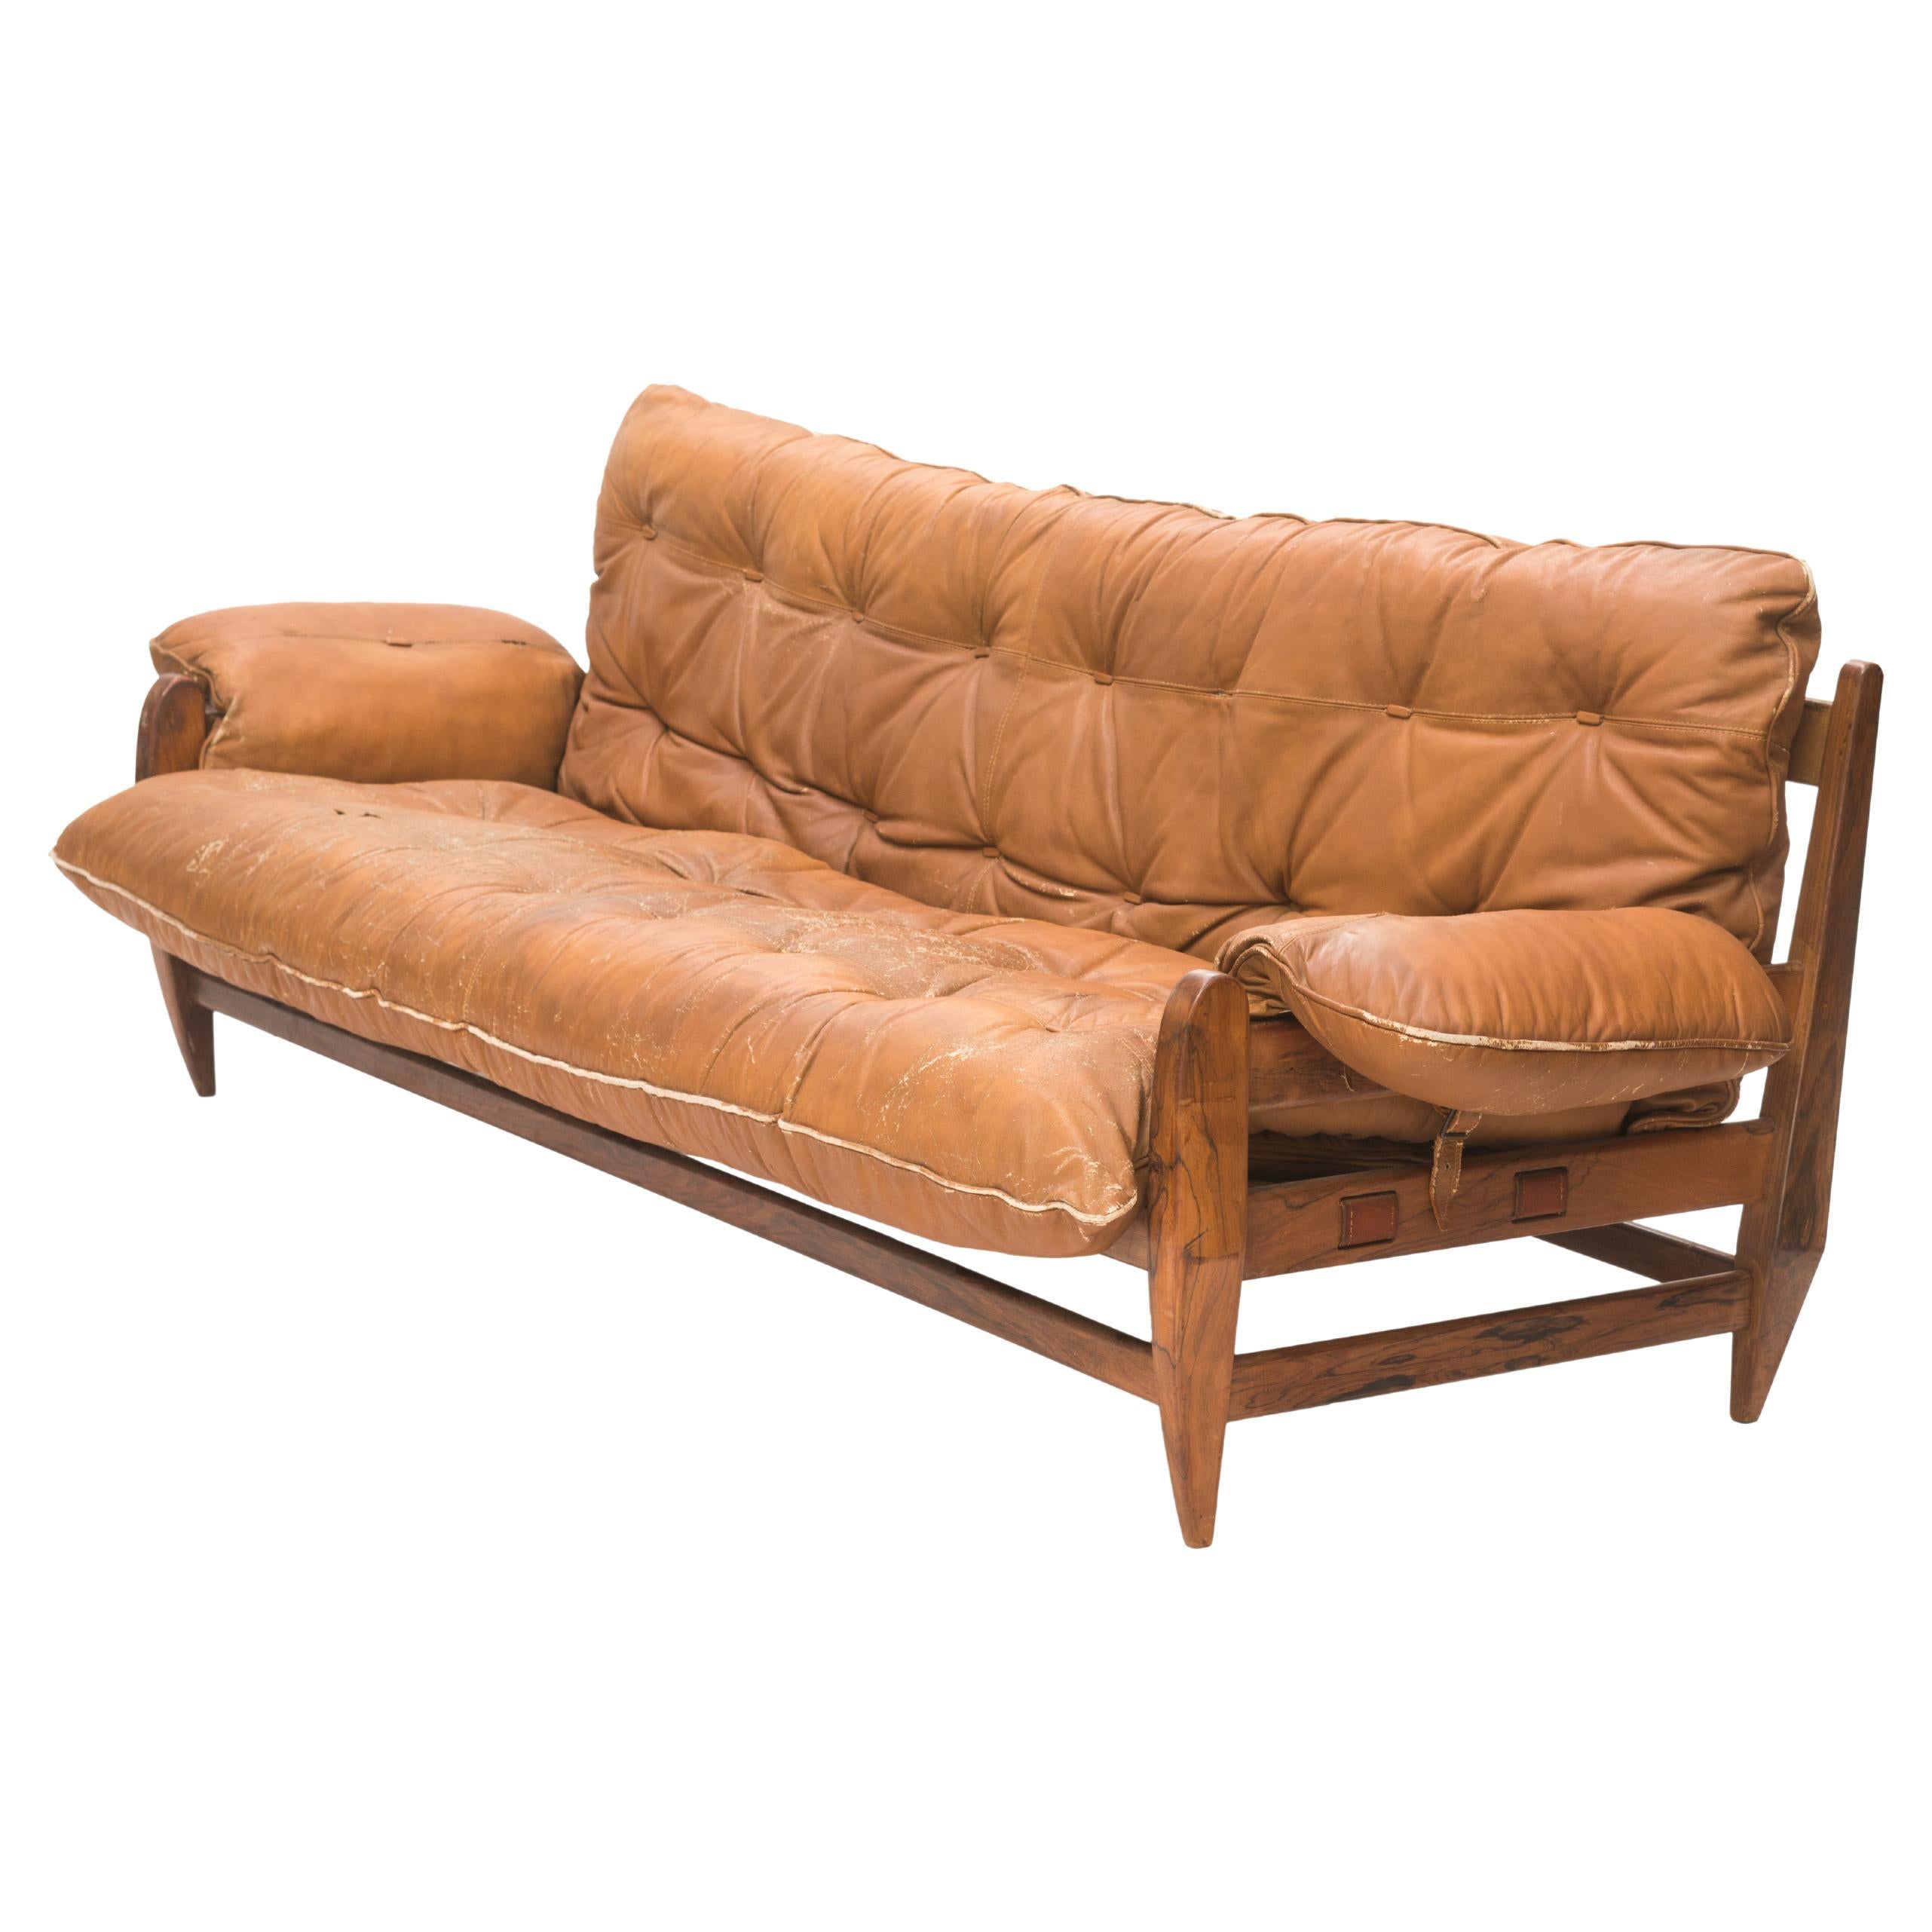 Jean Gillon "Rodeio" Midcentury brazilian sofa in Wood with Leather, 60s For Sale